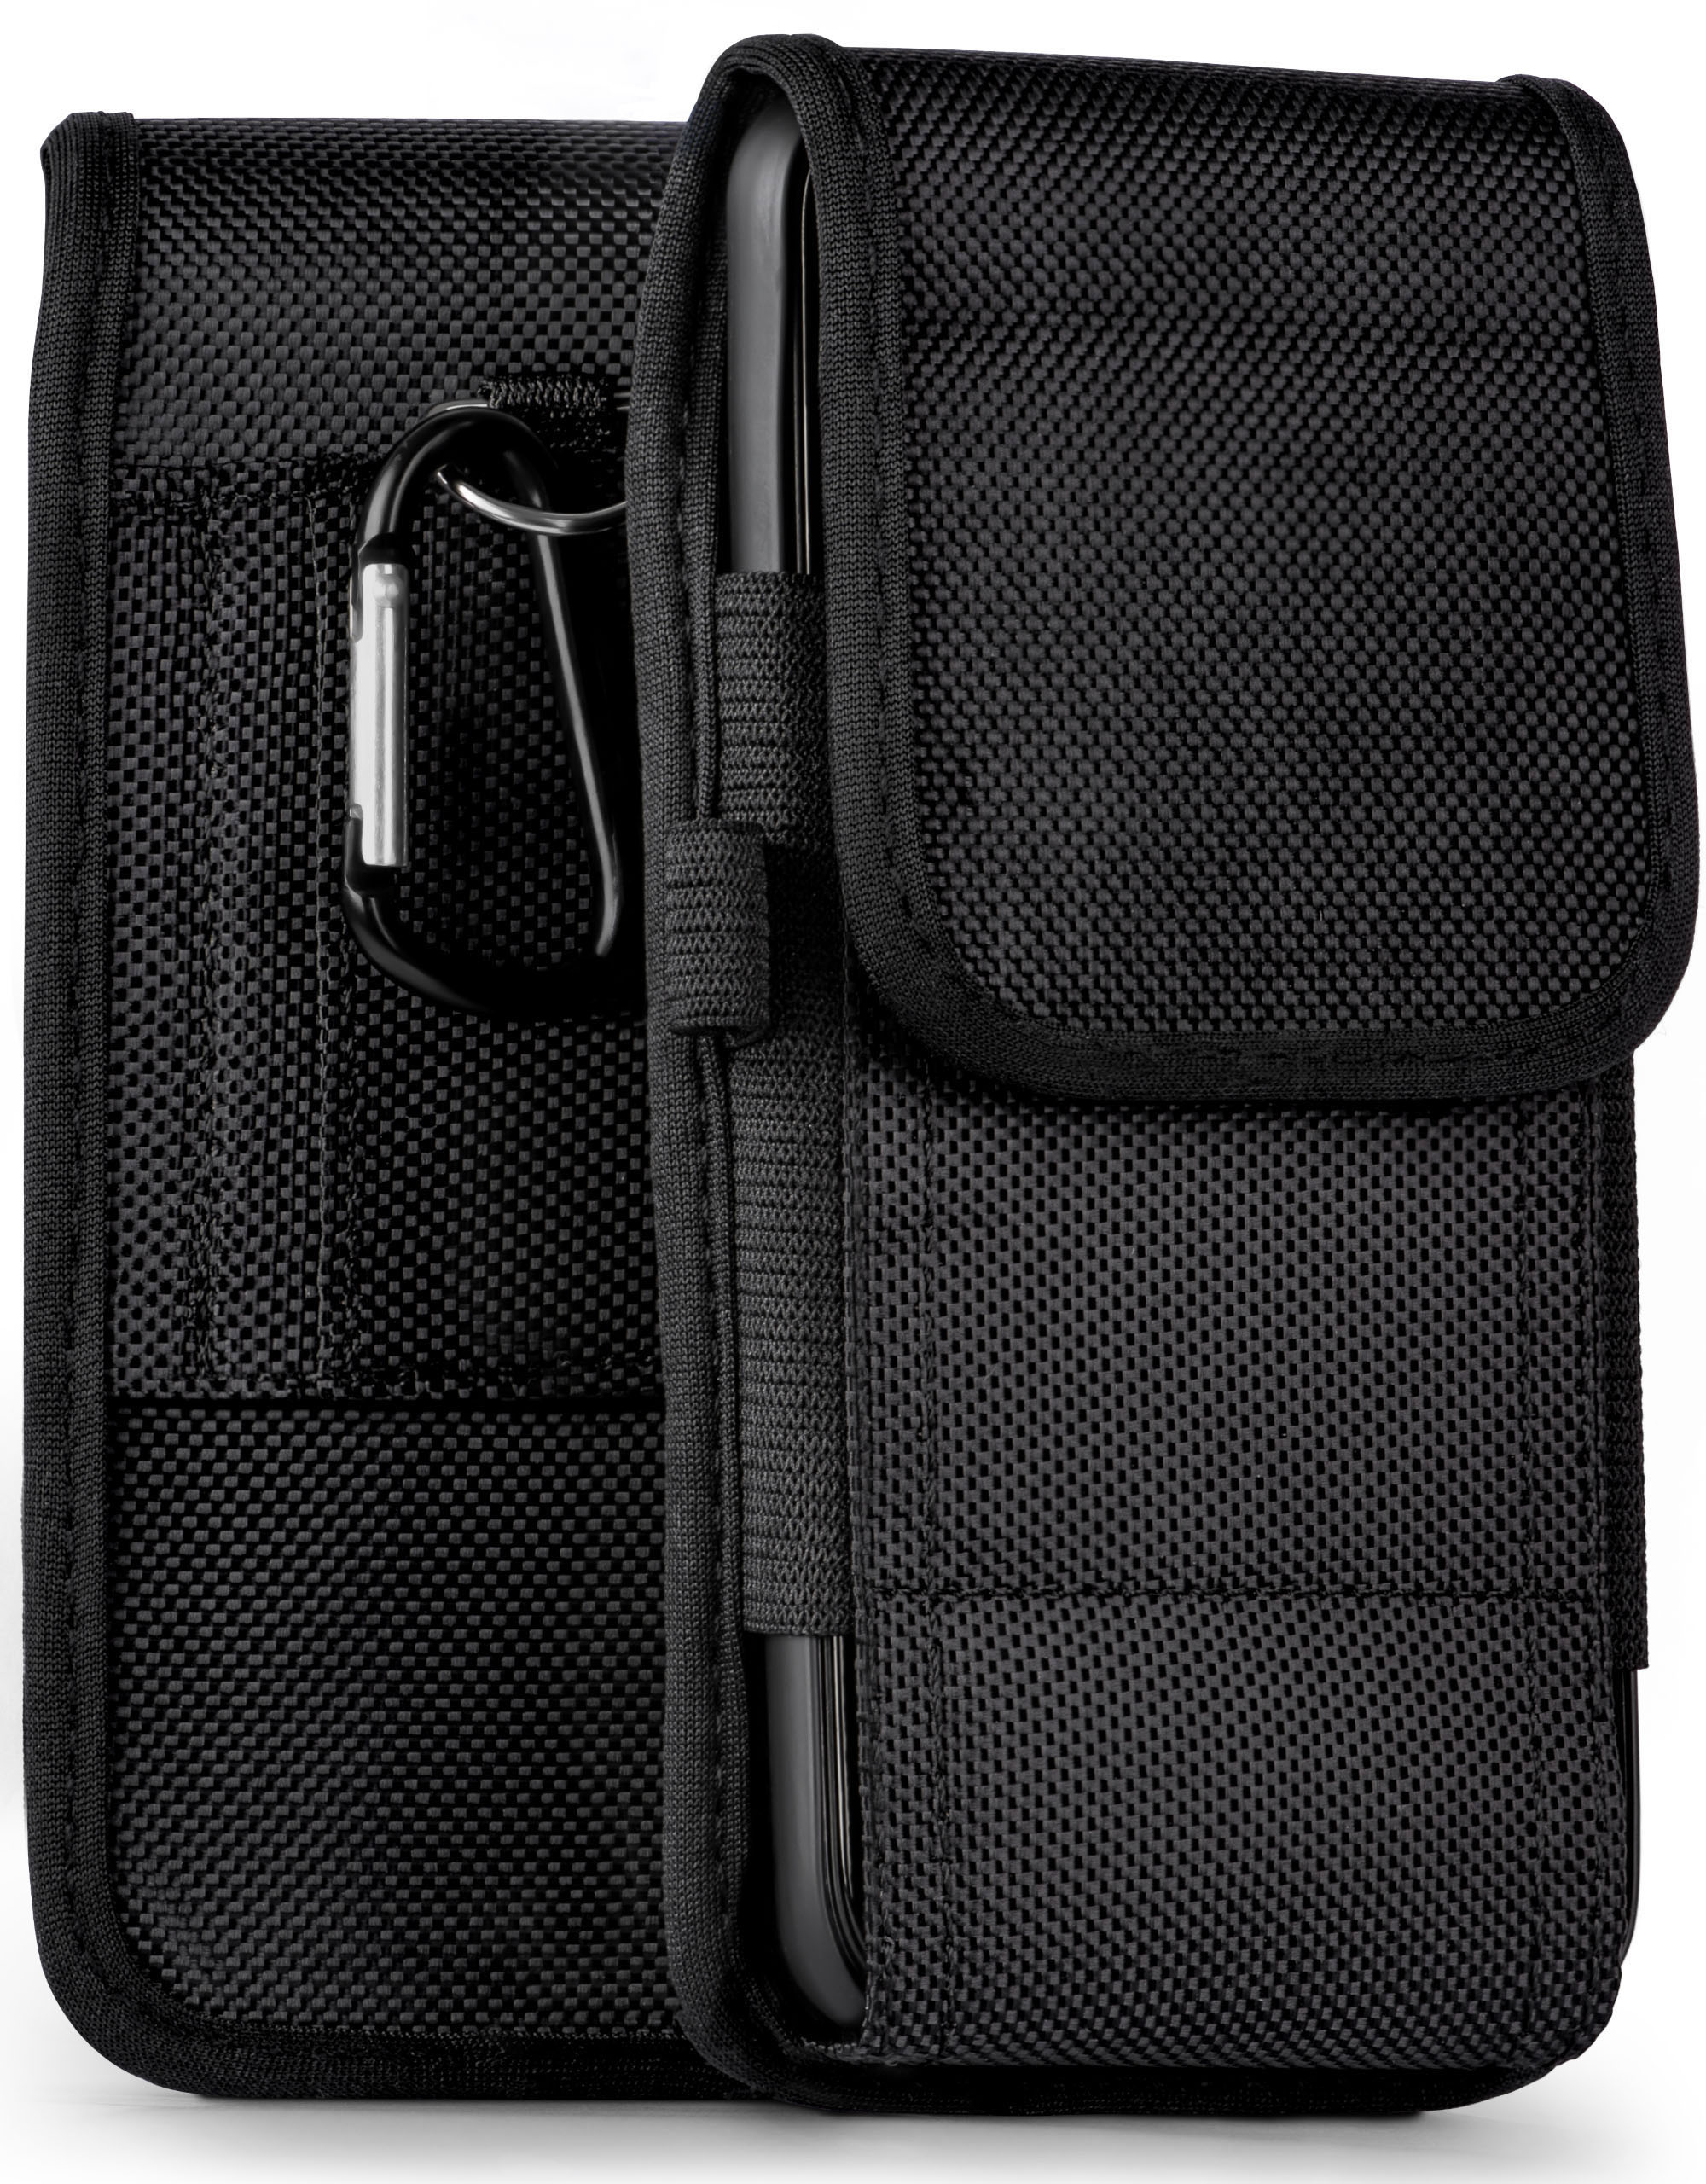 Case, X Compact, Agility Trail Sony, MOEX Xperia Holster,